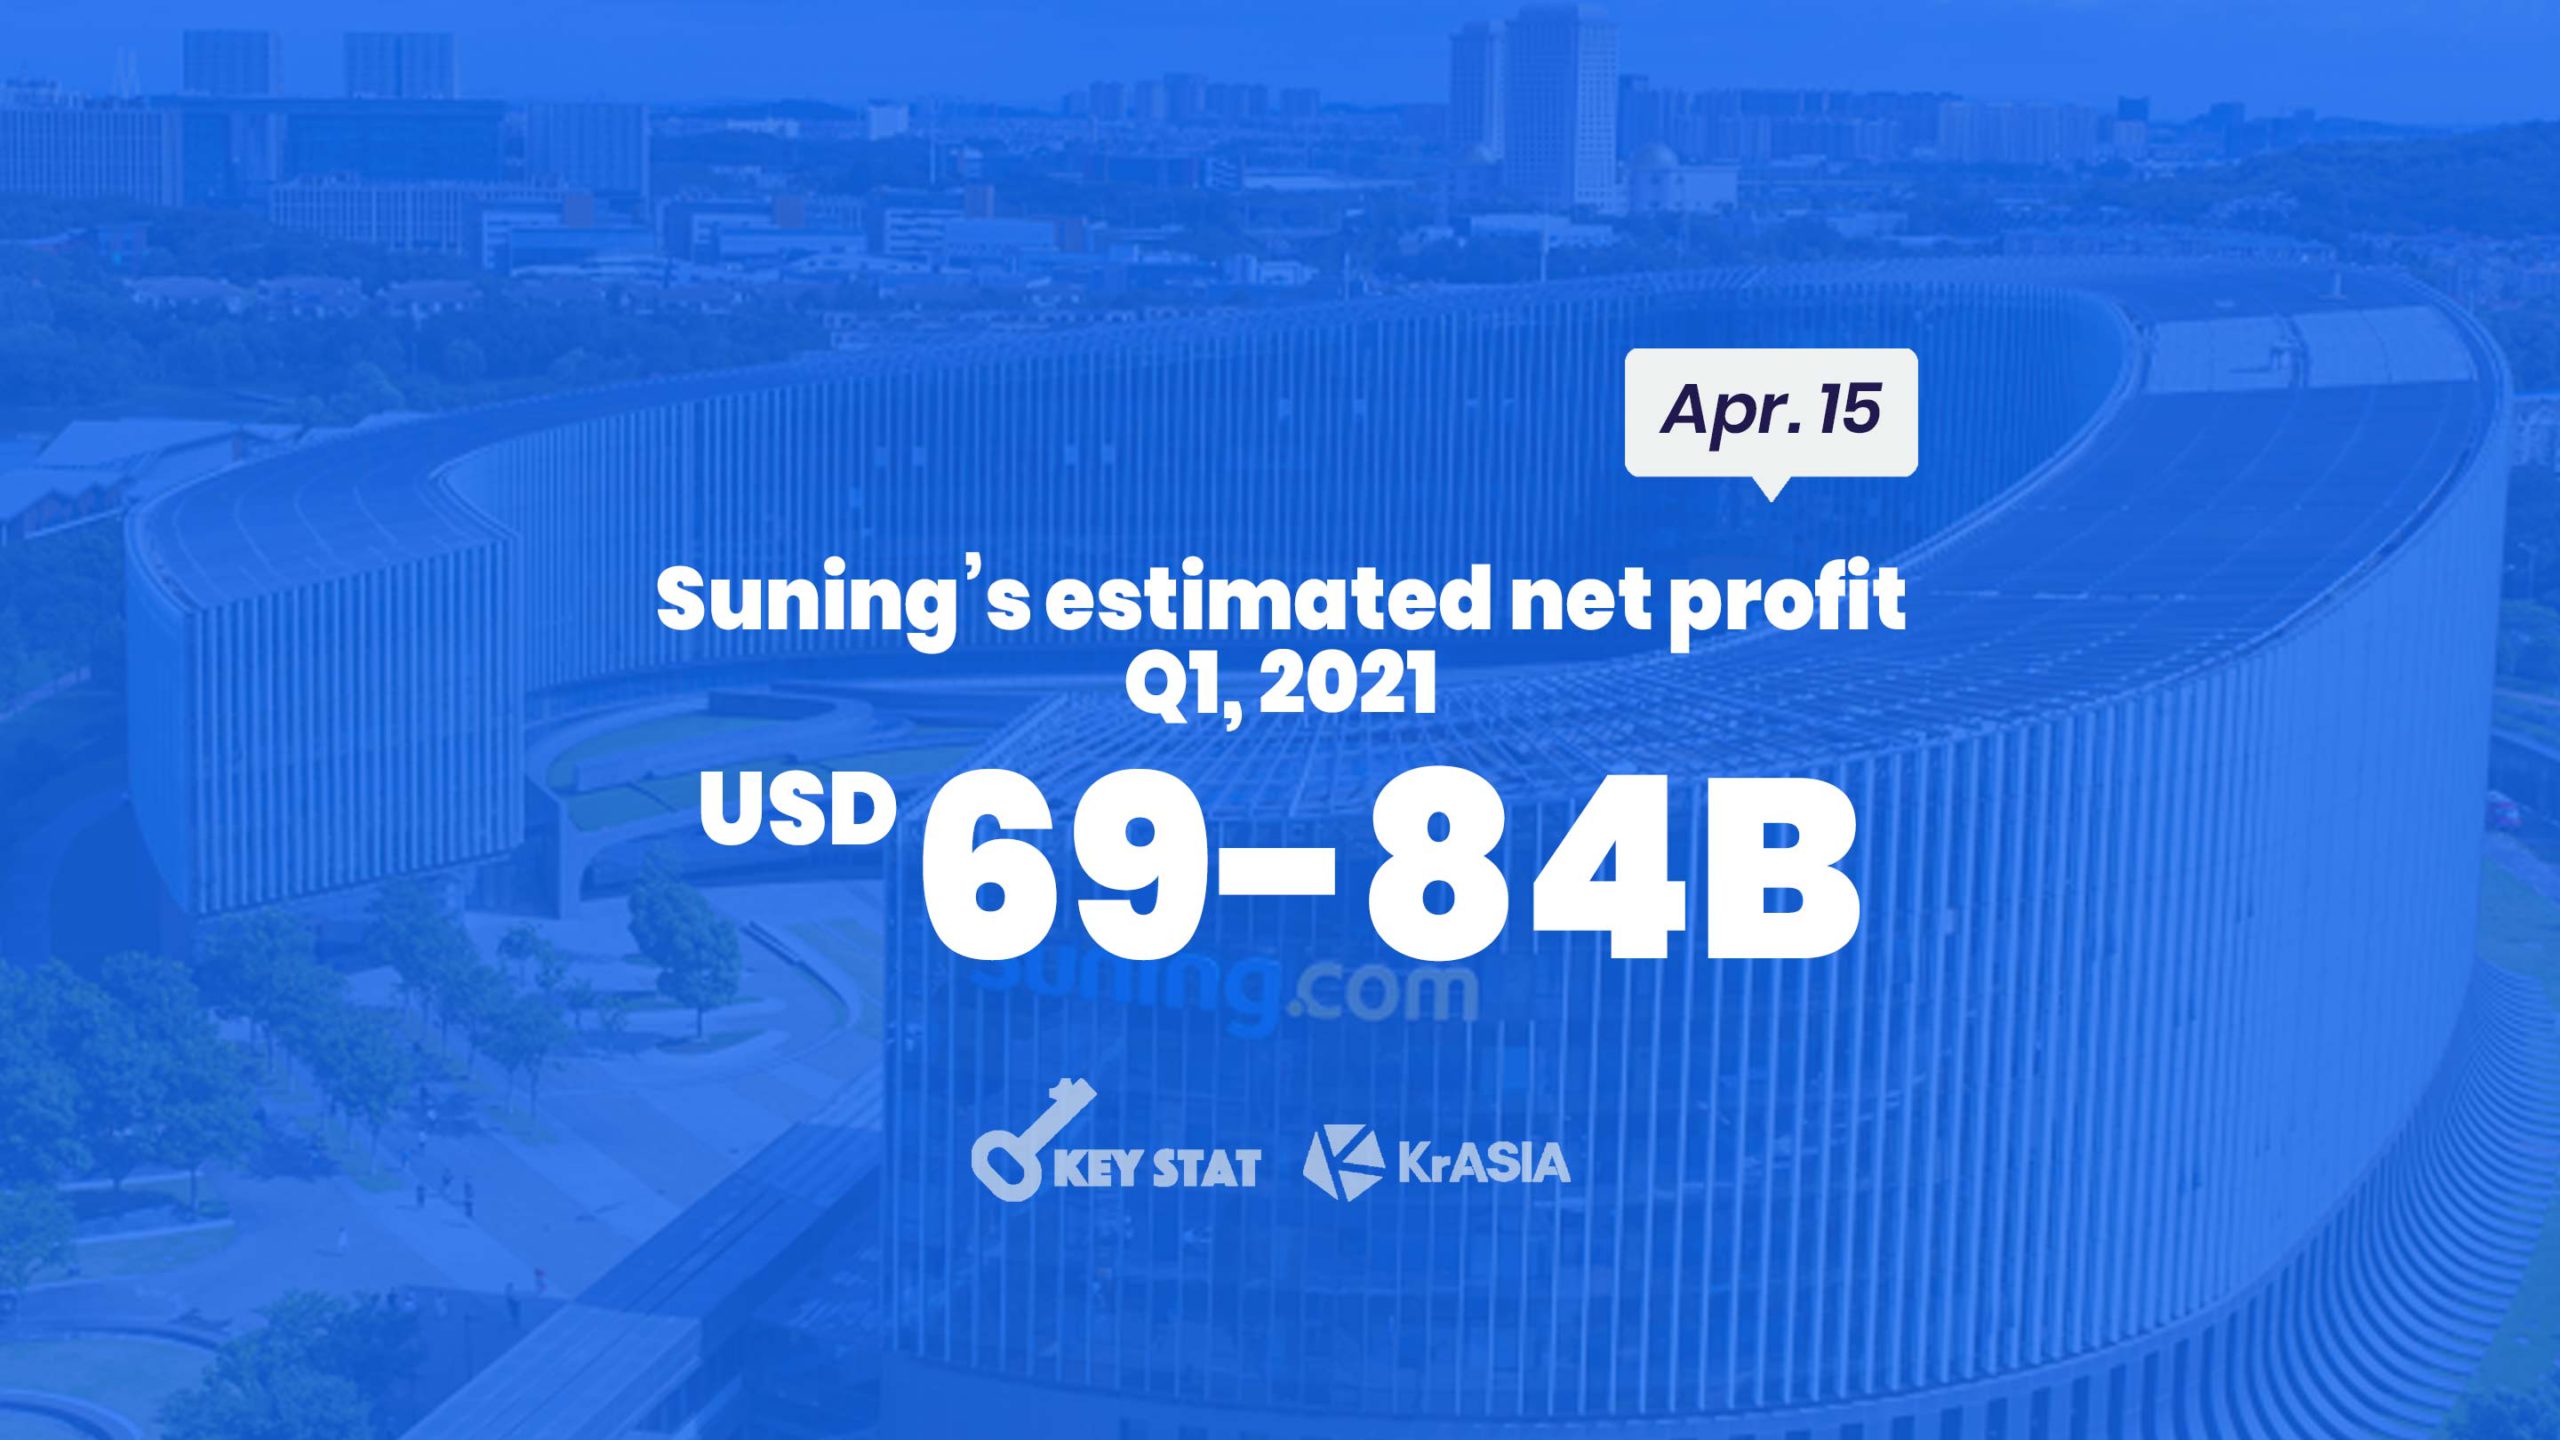 KEY STAT | Retailer Suning expects to turn a profit in Q1